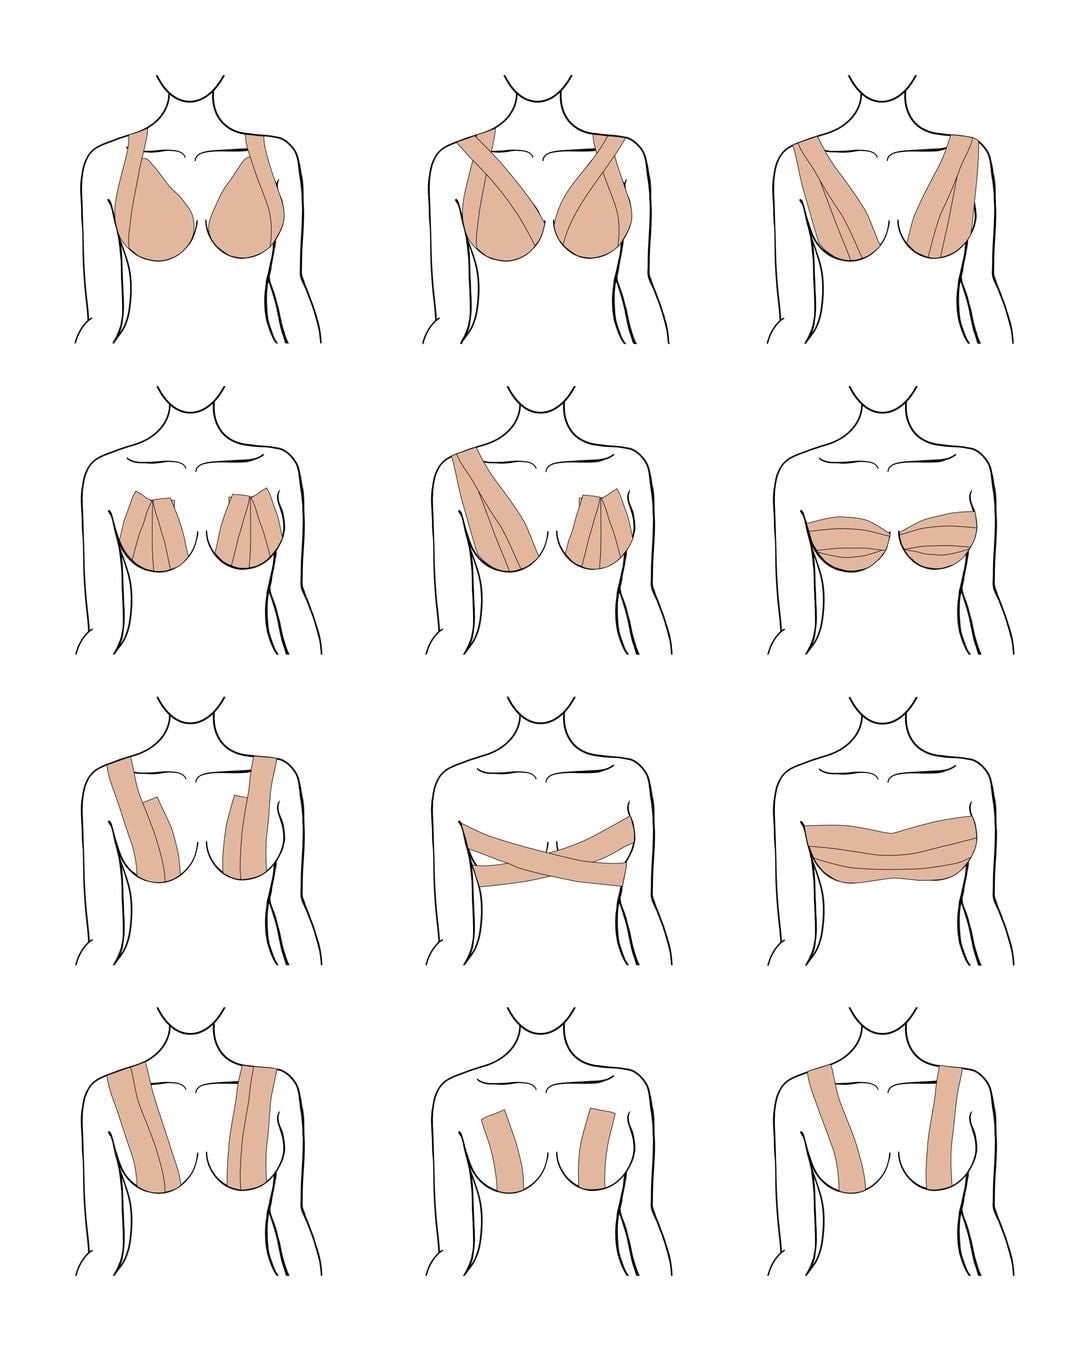 https://bridalprovisions.com/wp-content/uploads/2022/01/BOOB-TAPE-HOW-TO.jpg